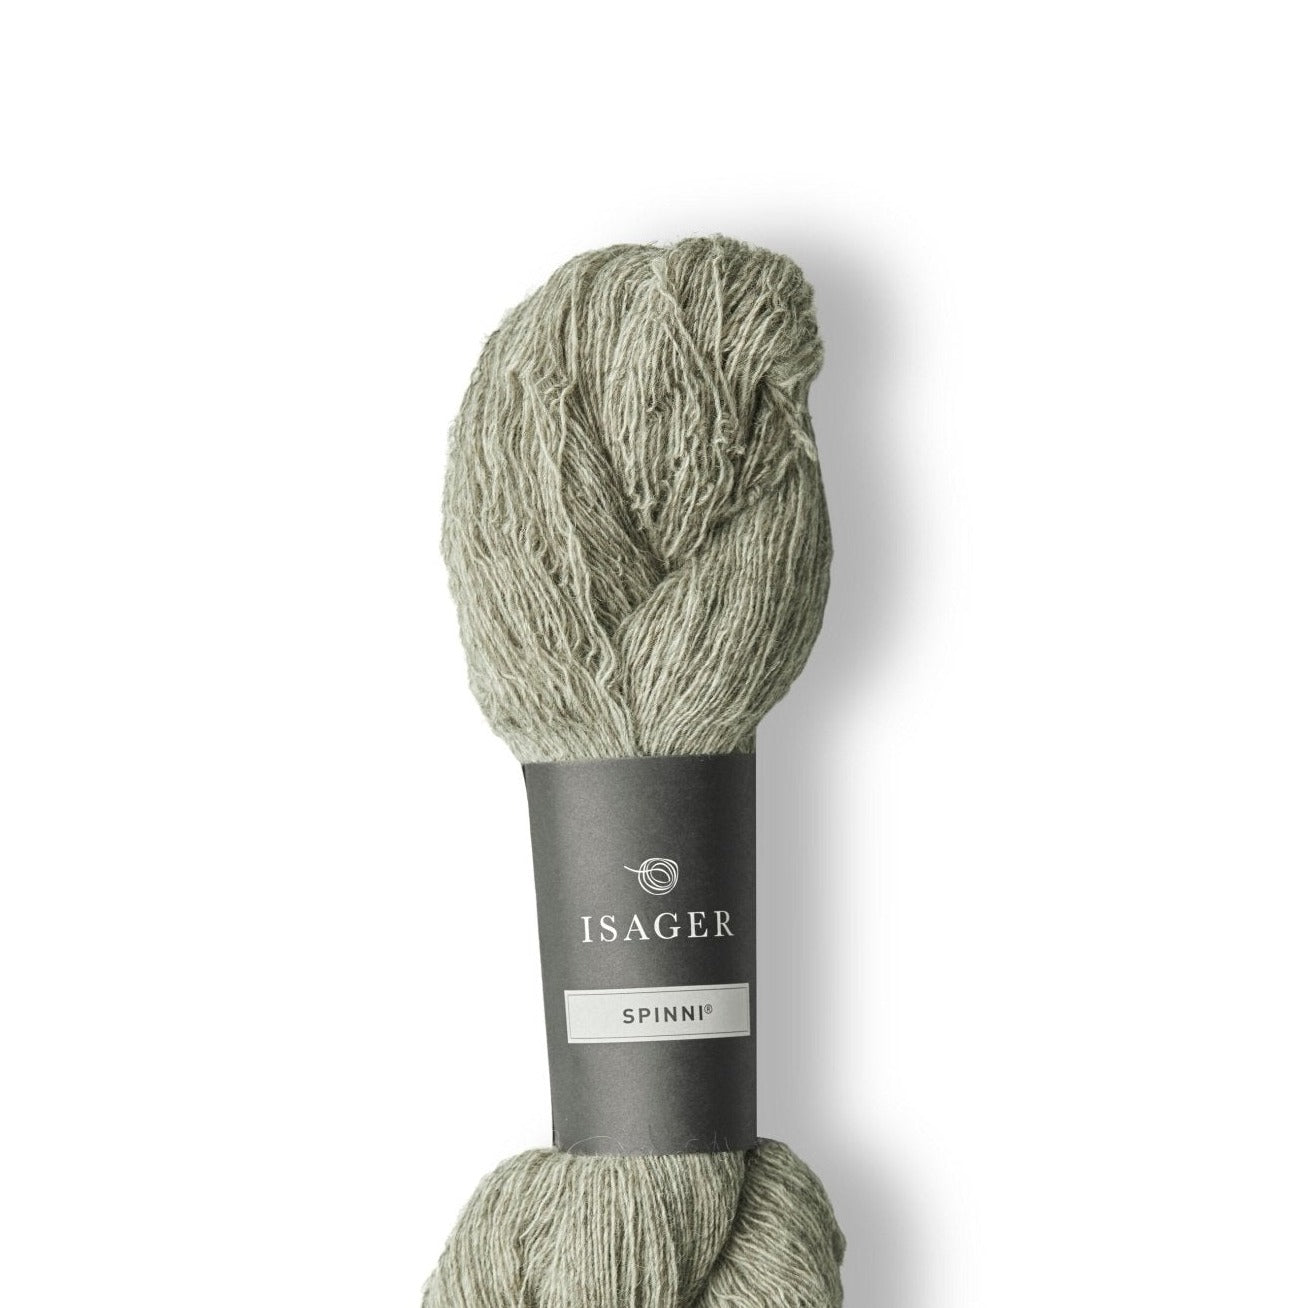 Isager Spinni - 3s - 2 Ply - Isager - The Little Yarn Store